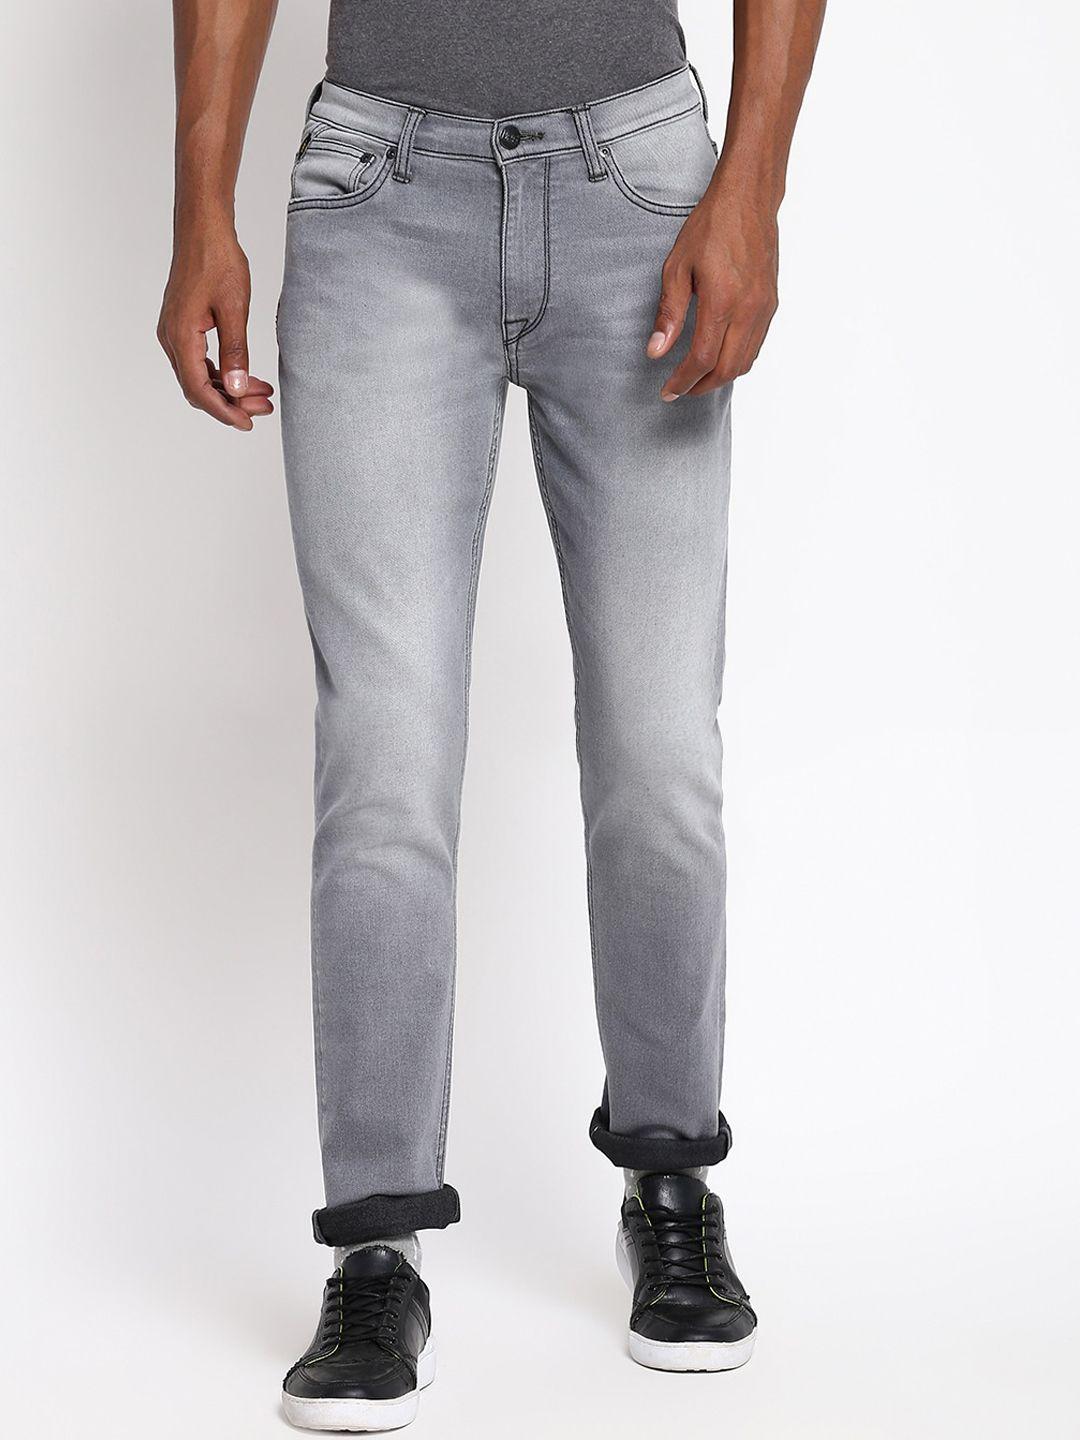 lee-men-grey-skinny-fit-heavy-fade-stretchable-cotton-jeans